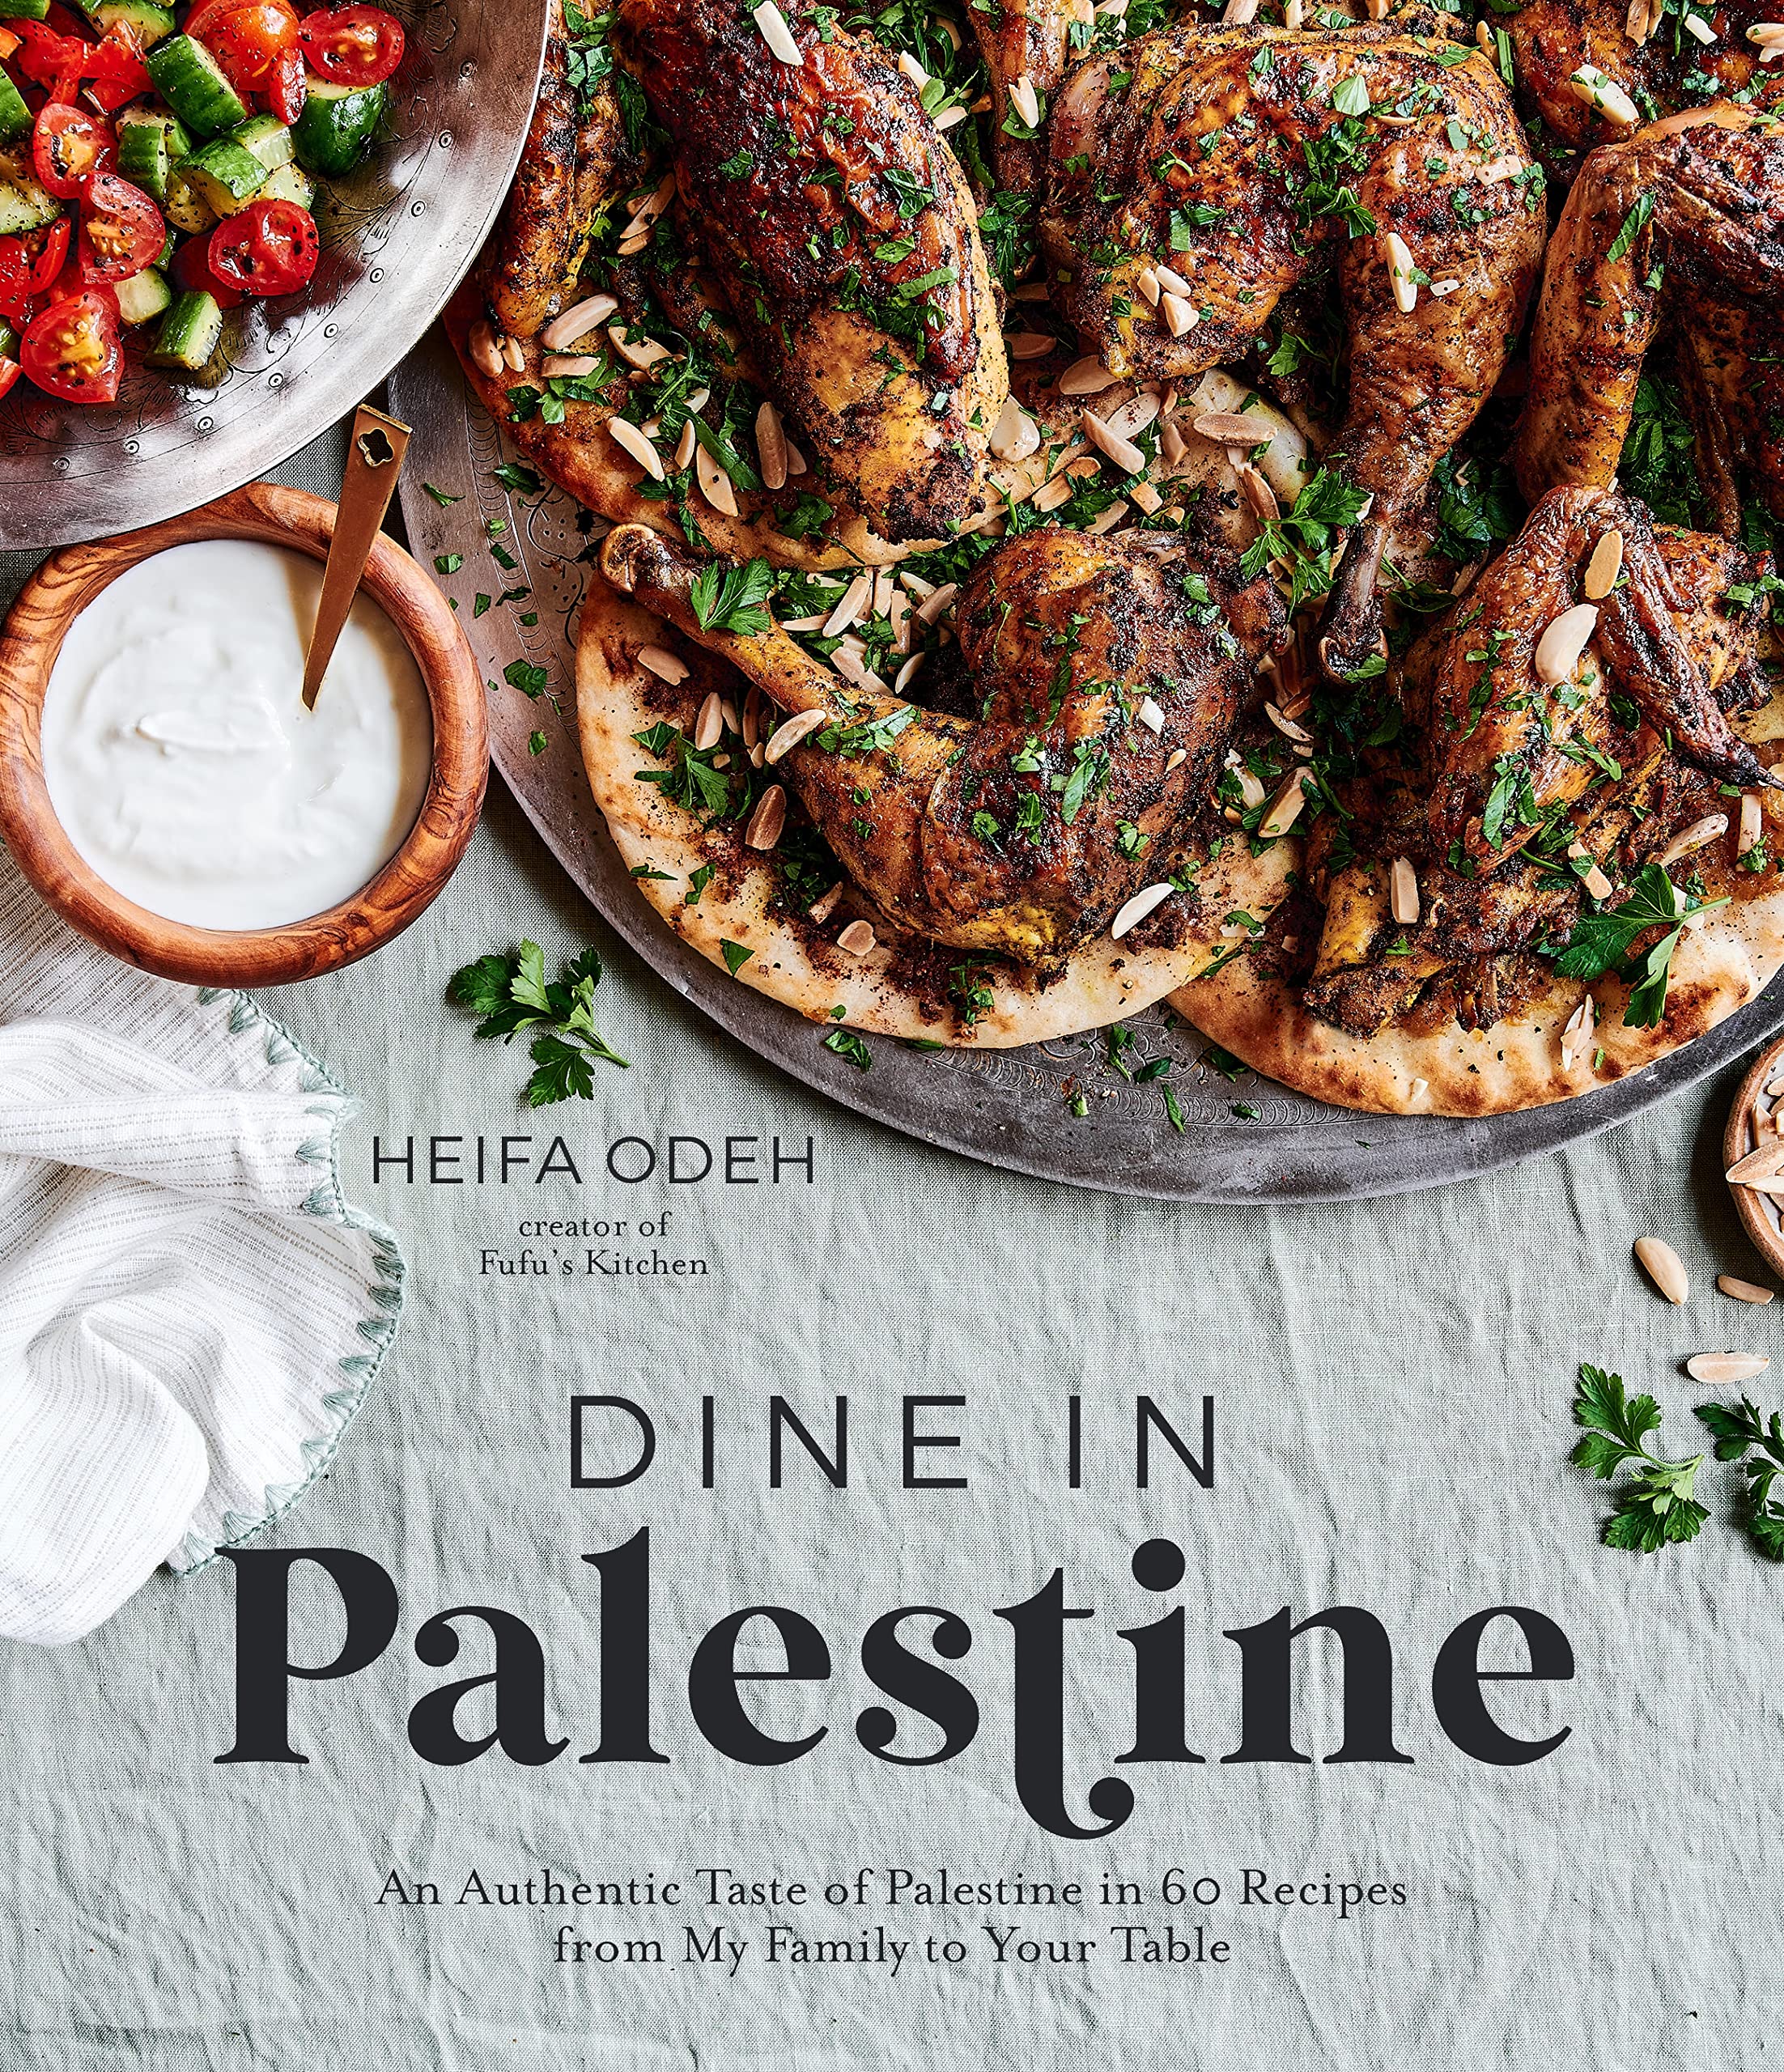 Dine in Palestine: An Authentic Taste of Palestine in 60 Recipes from My Family to Your Table | Heifa Odeh